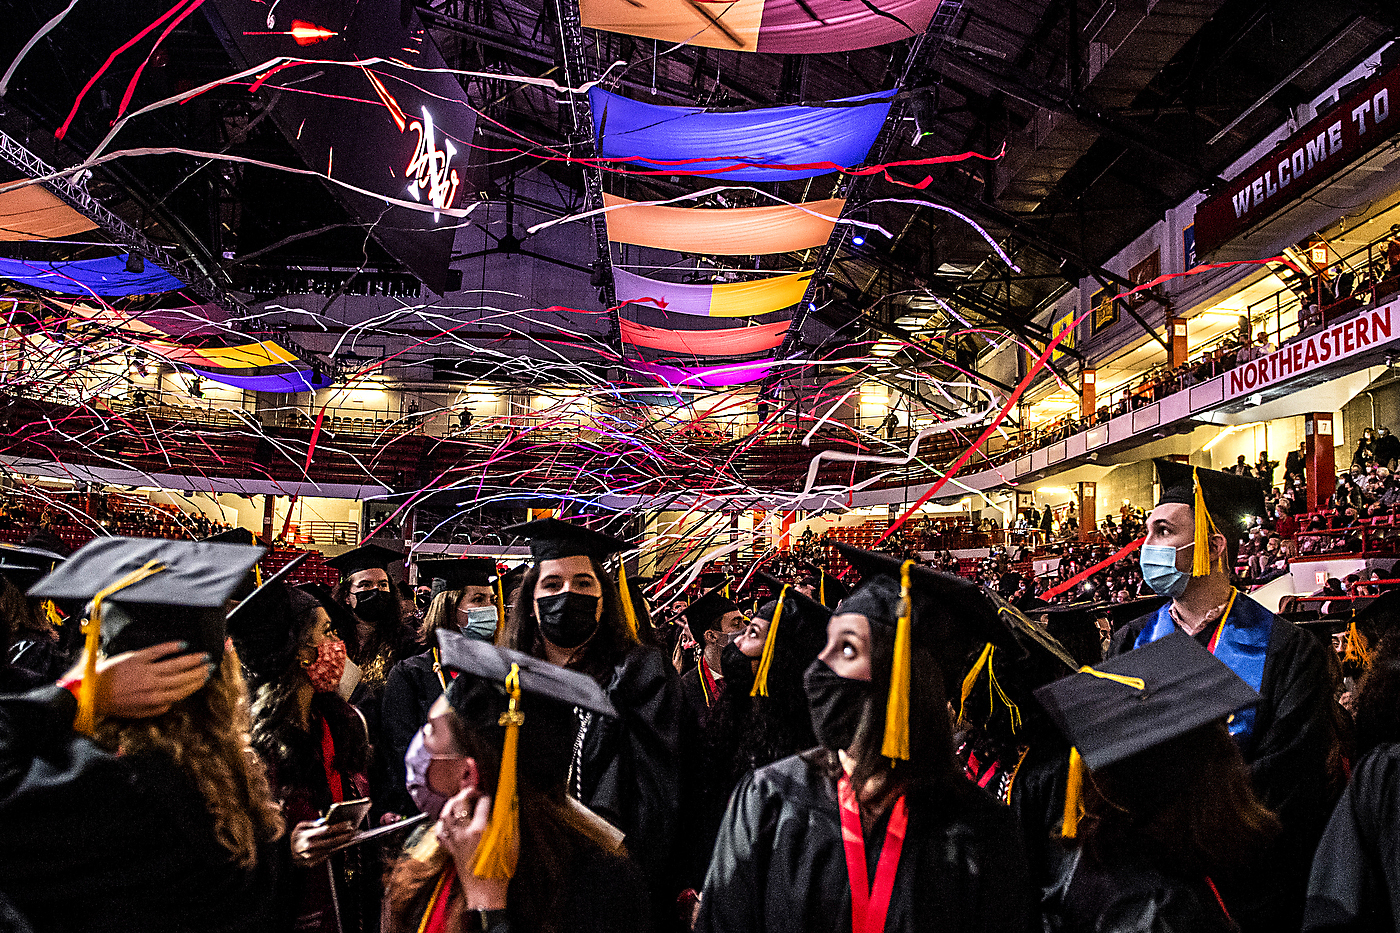 Graduates look up at streamers and brightly colored flags overhead